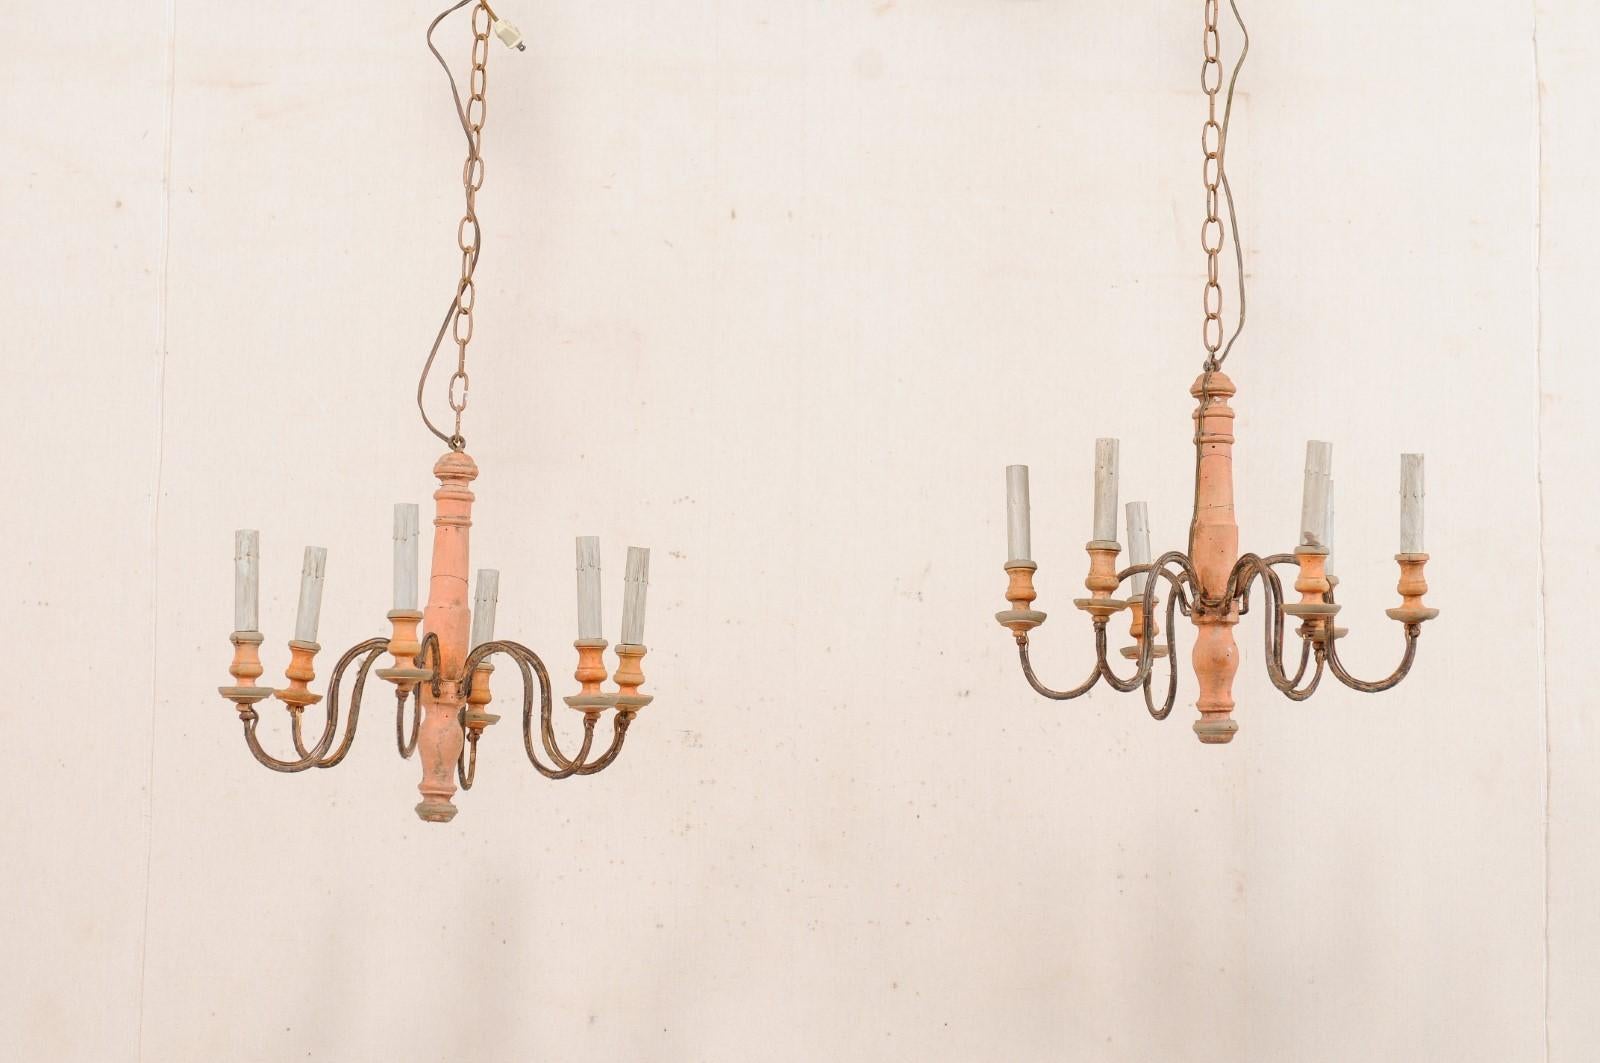 French Pair of Six-Light Wood Column Chandeliers with Iron Arms, Wired for US 4